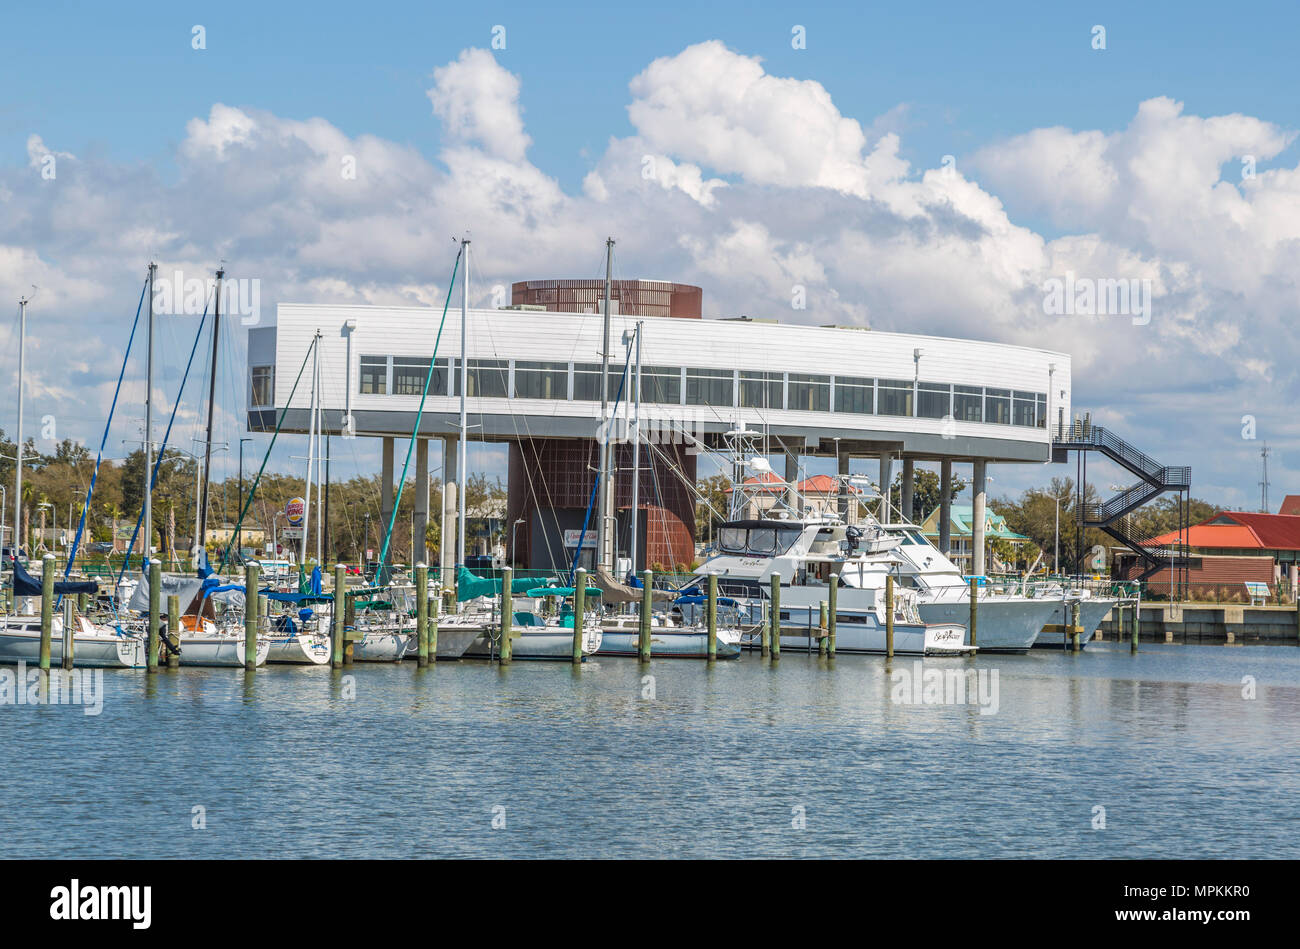 Unique cantilevered architecture of restaurant along the Mississippi Gulf Coast in Long Beach, Mississippi Stock Photo